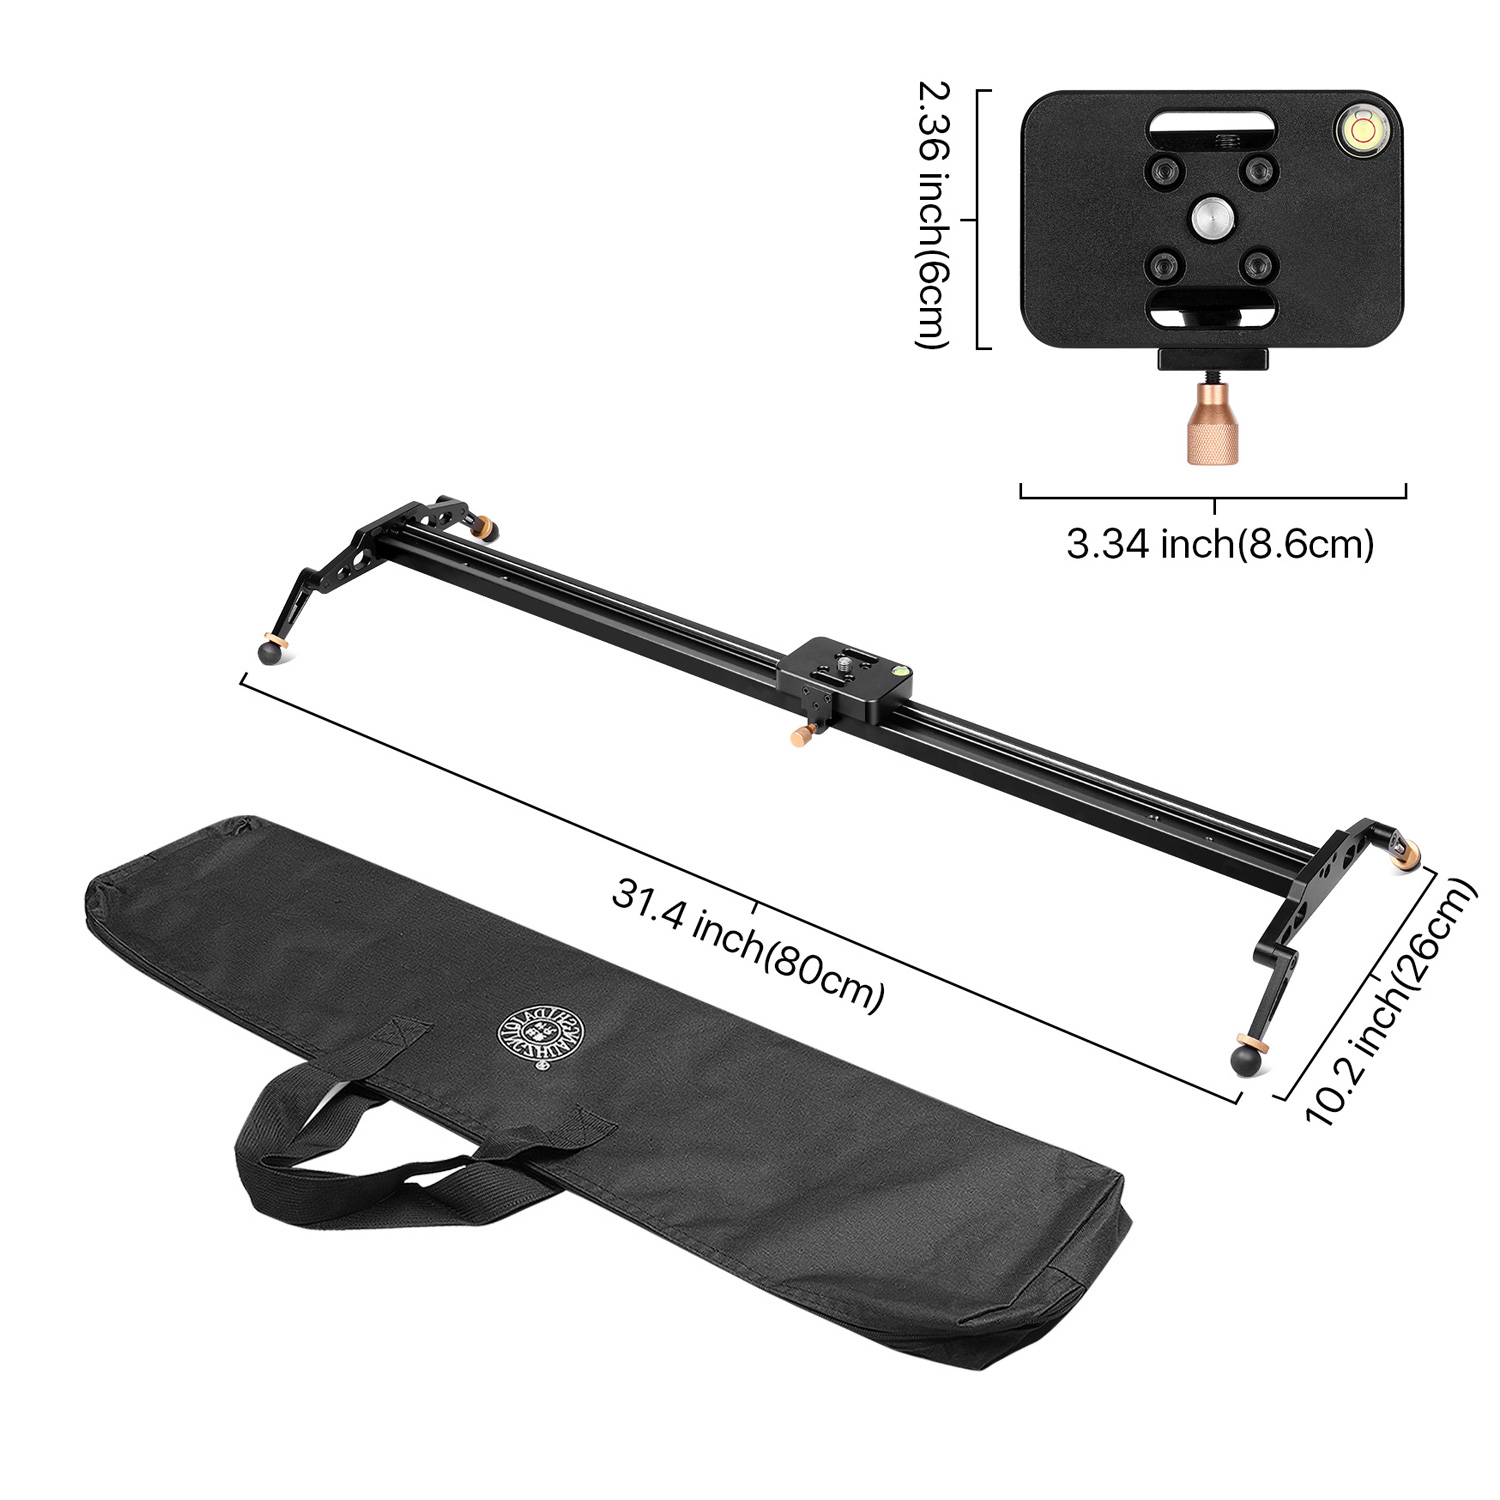 Use on a tripod, or on a flat surface with included removable and adjustable legs with non-skid rubber feet. Multiple 1/4" & 3/8" screw holes on both ends and middle for multiple mounting options